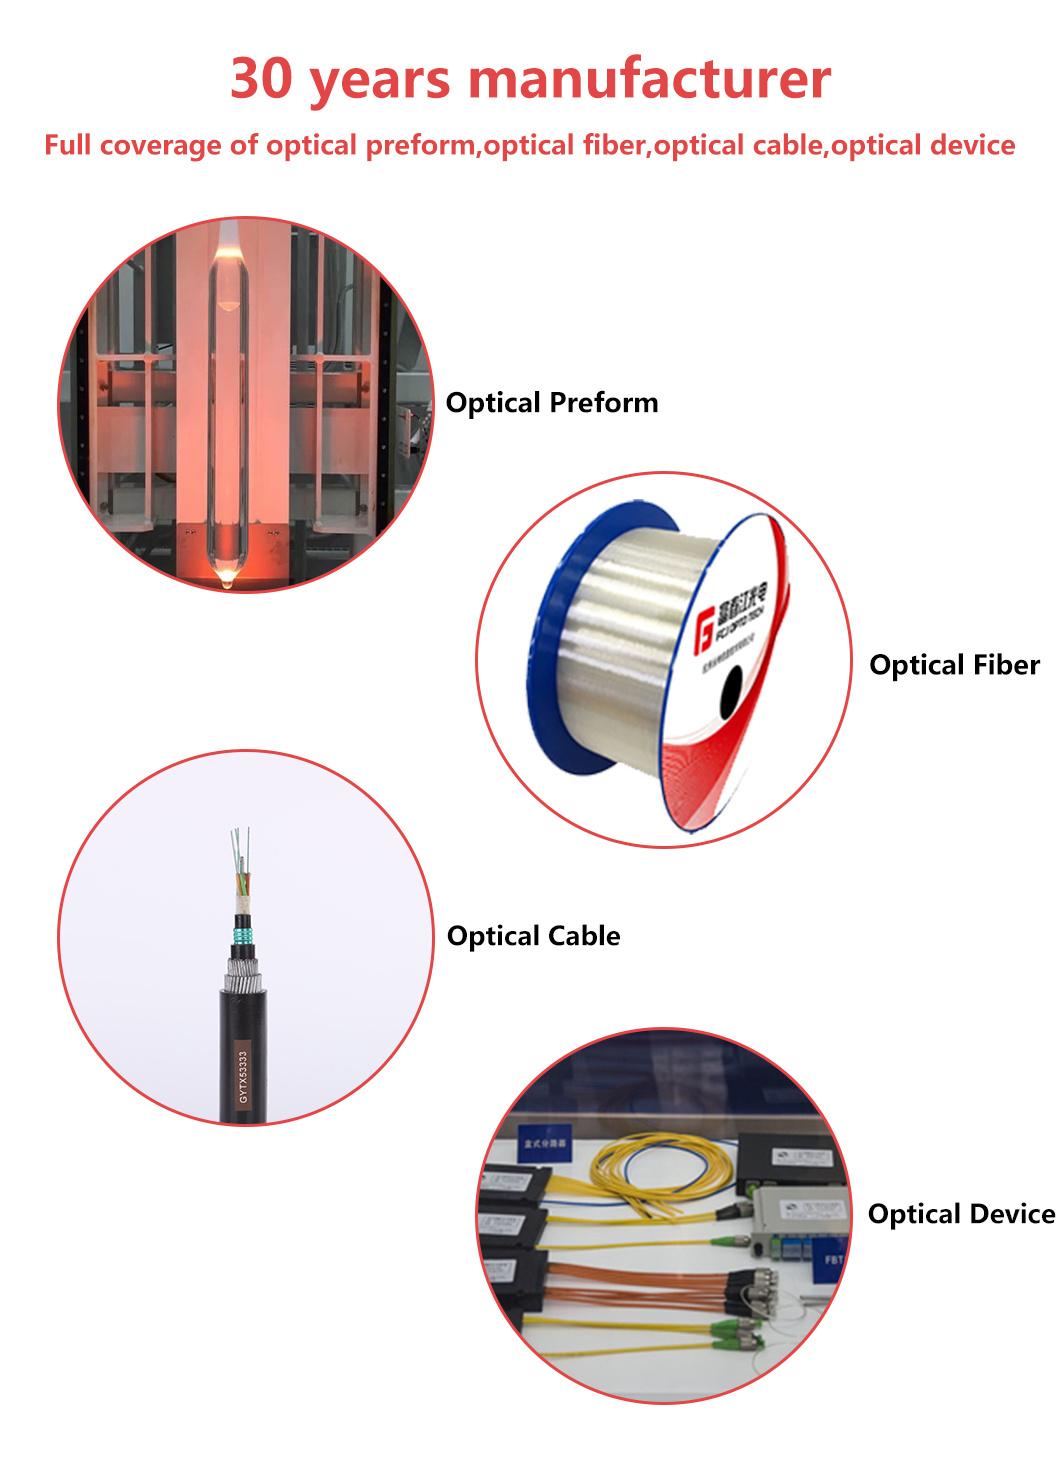 GYFTY Network Cable 4 Core Optic Fiber Cable G655 Light-Armored Outdoor Cable Optical Fiber Armoured Cable with Om1/2/3